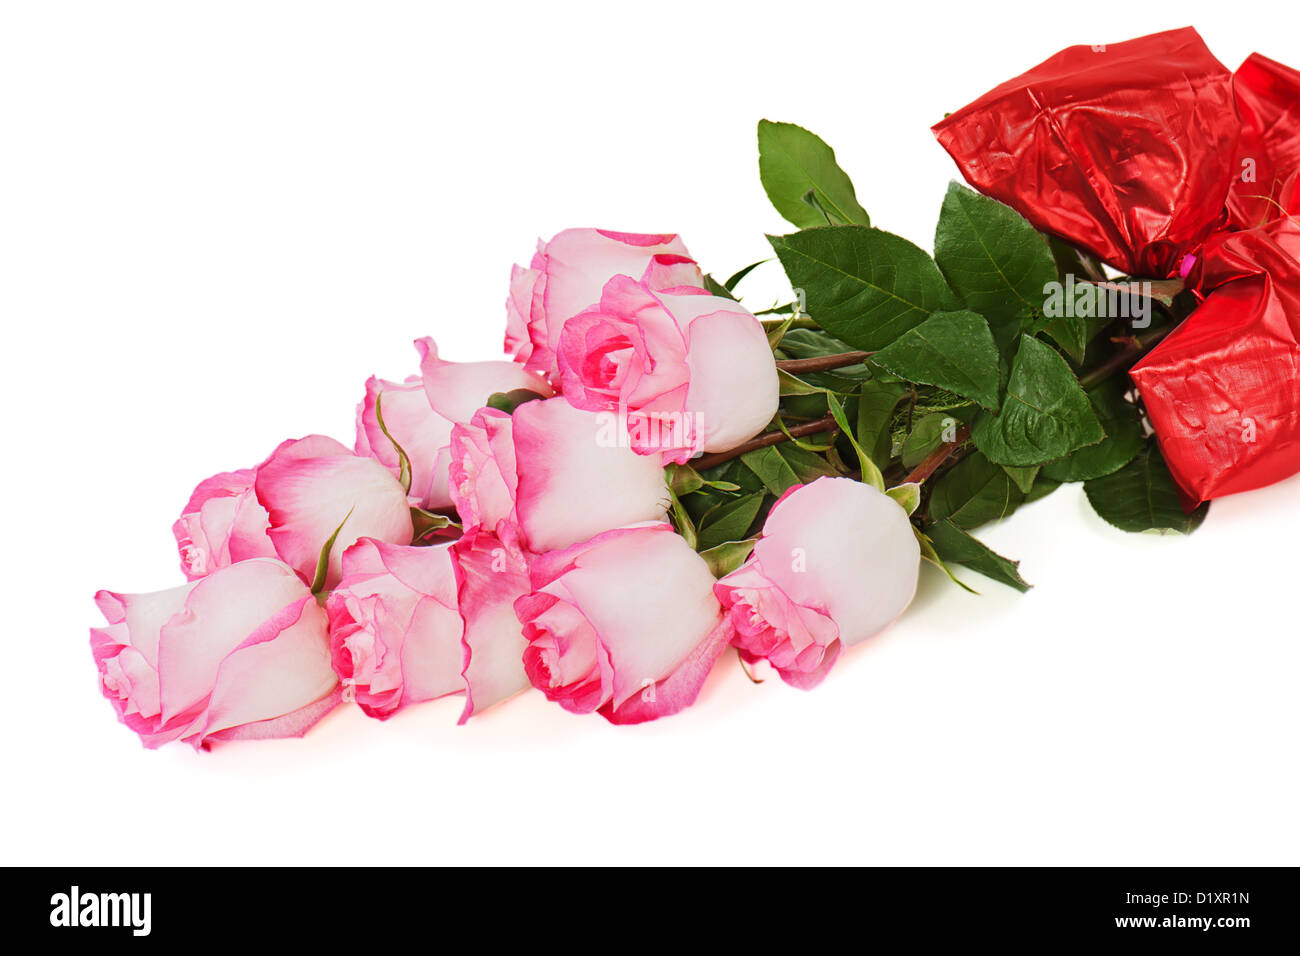 colorful flower bouquet from roses isolated on white background Stock Photo